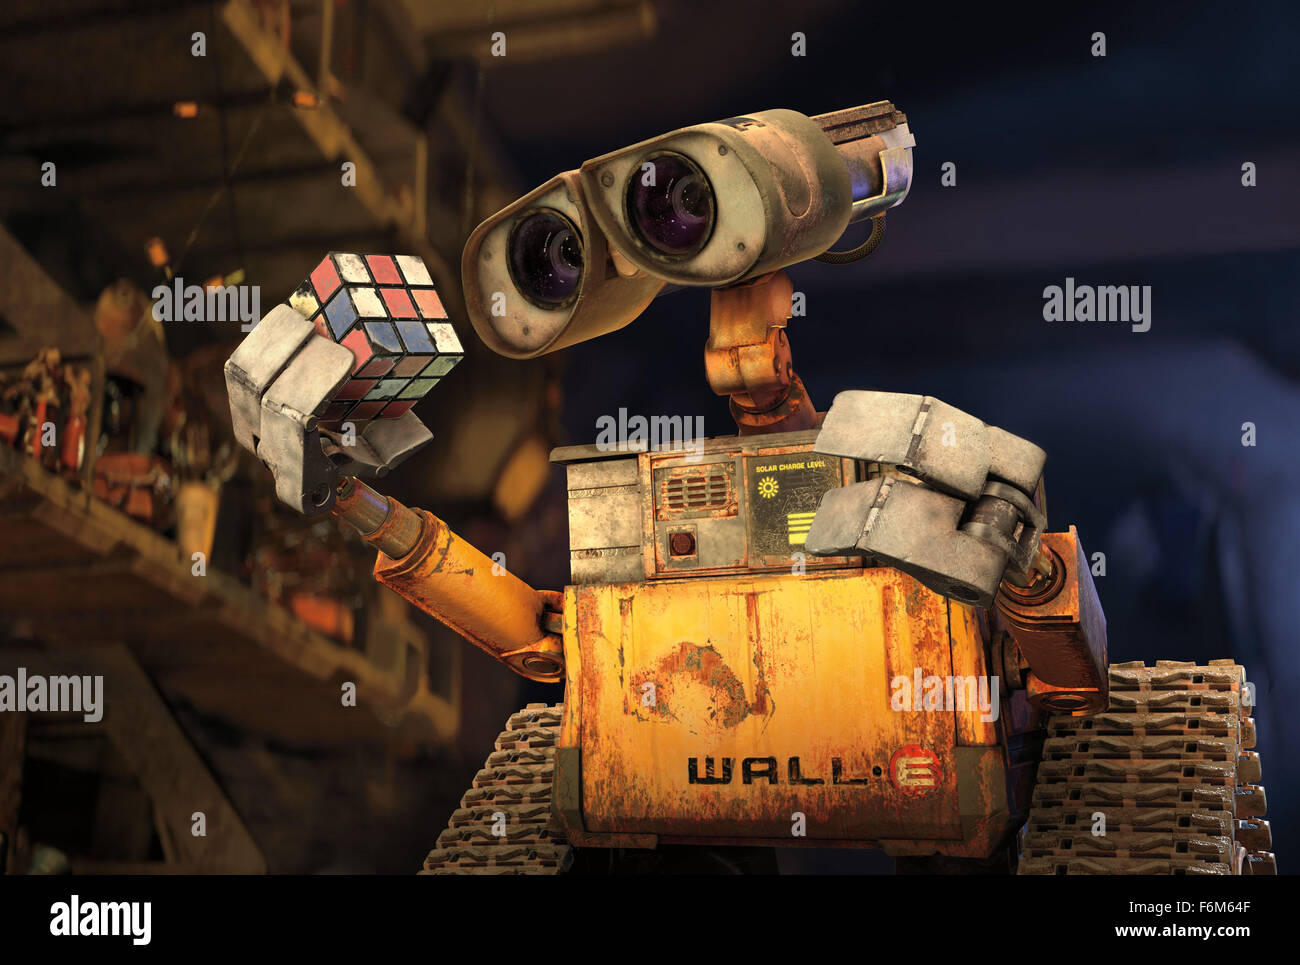 RELEASE DATE: 27 June 2008. MOVIE TITLE: WALL-E. STUDIO: Pixar Animation  Studios. PLOT: In the distant future, a small waste collecting robot  inadvertently embarks on a space journey that will ultimately decide